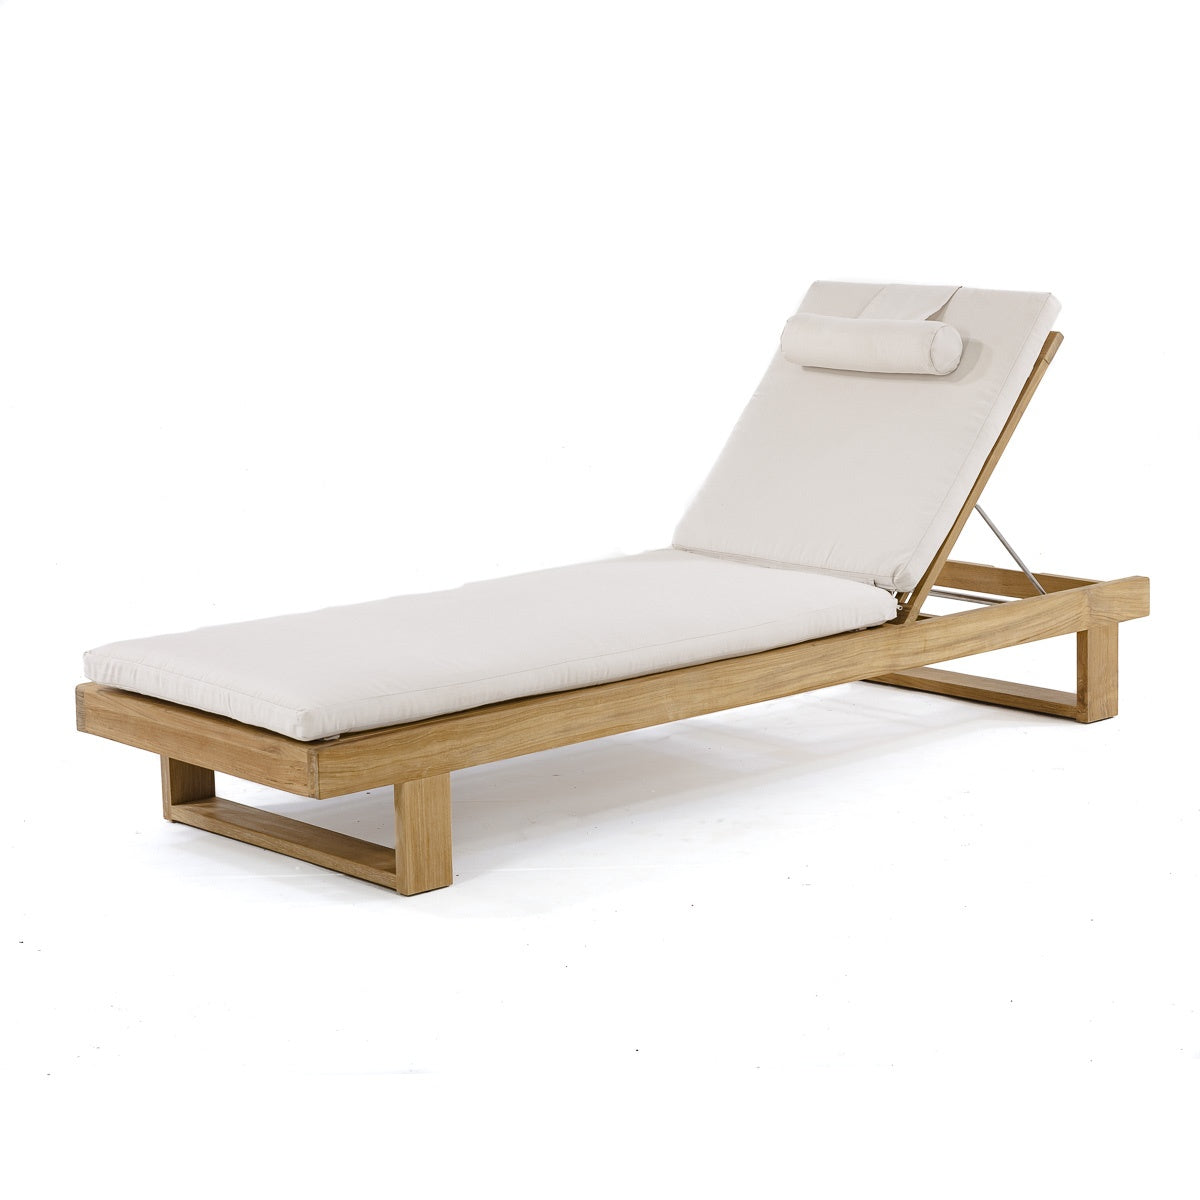 Westminster Teak - Horizon Chaise Lounger Cushion Included - 16770DP